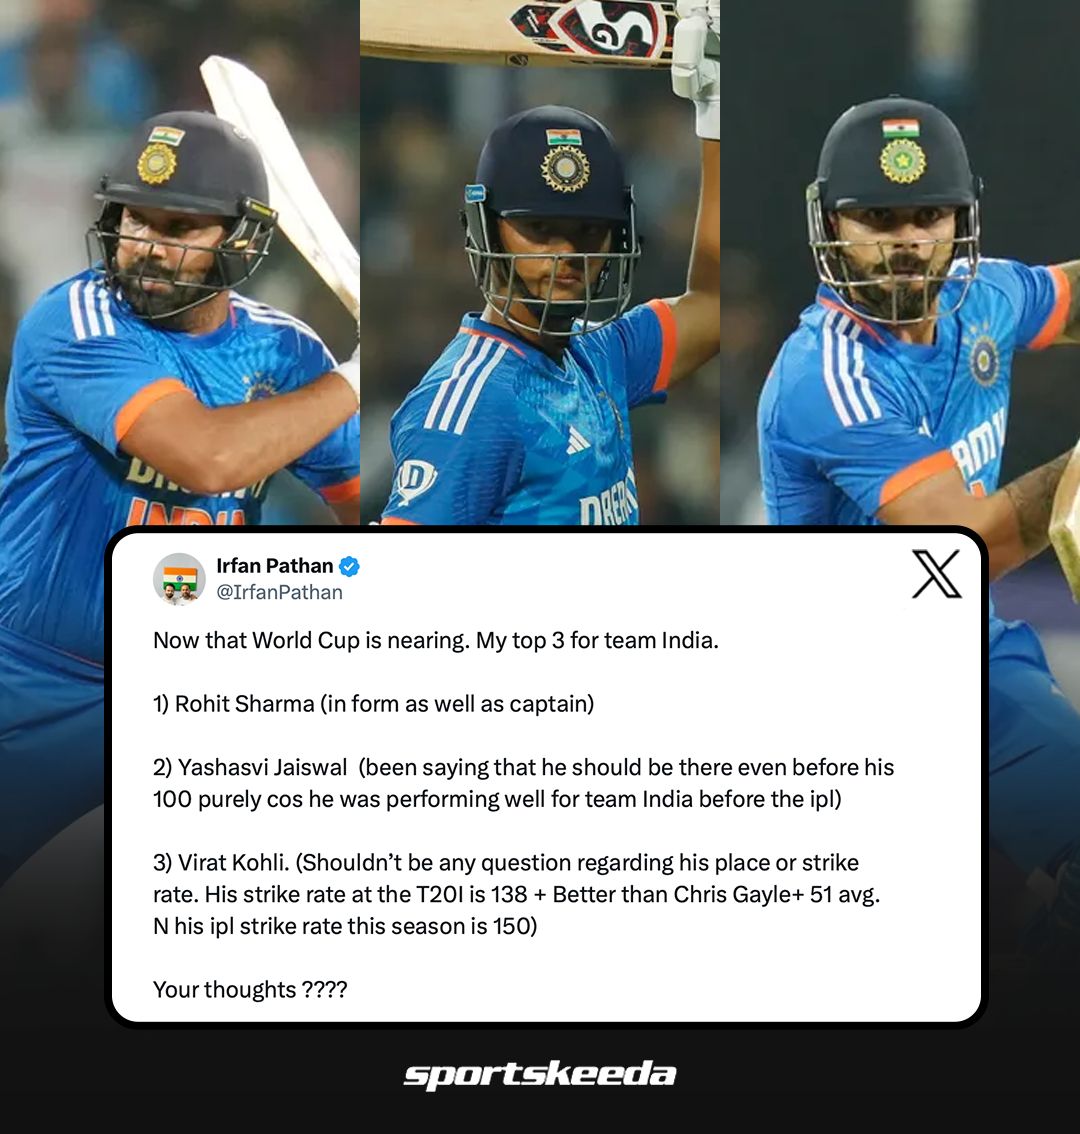 Do you agree with Irfan Pathan? 👀

#Cricket #Rohit #Kohli #Jaiswal #WorldCup